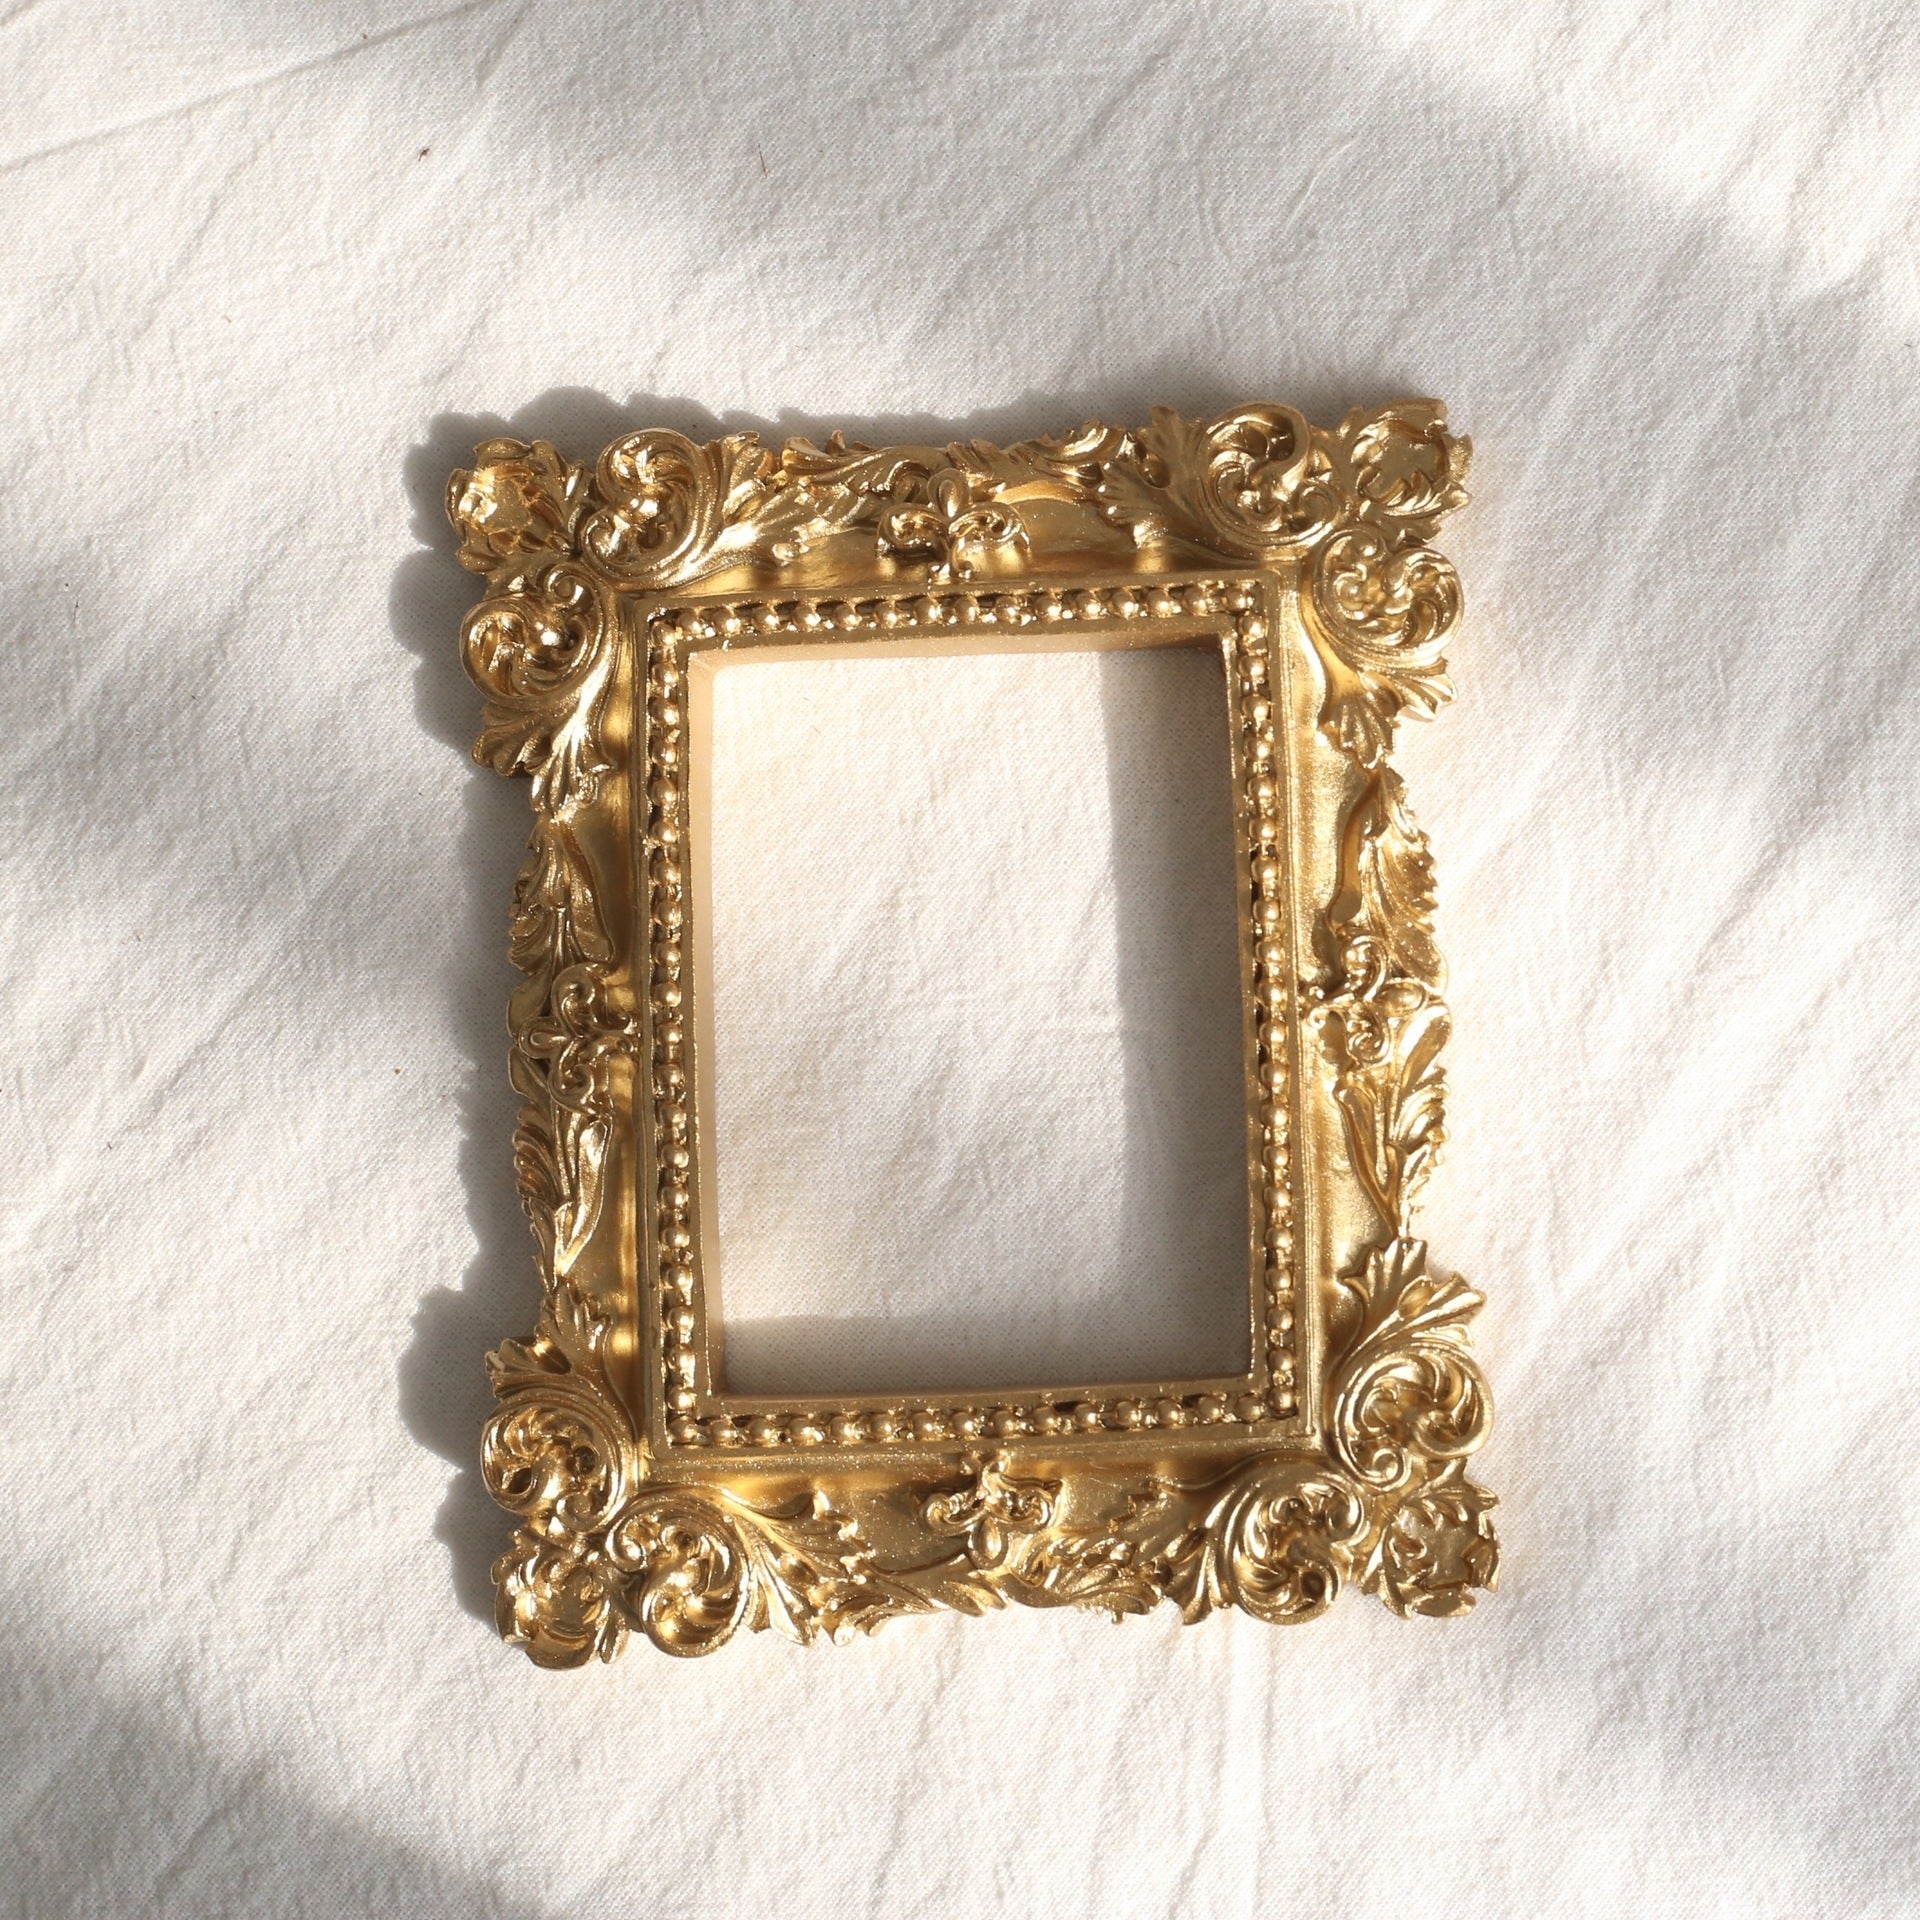 Golden Retro Photo Frame Nail Art Jewelry Decoration Home Decoration Photography Background Shooting Photo Props - Max&Mark Home Decor